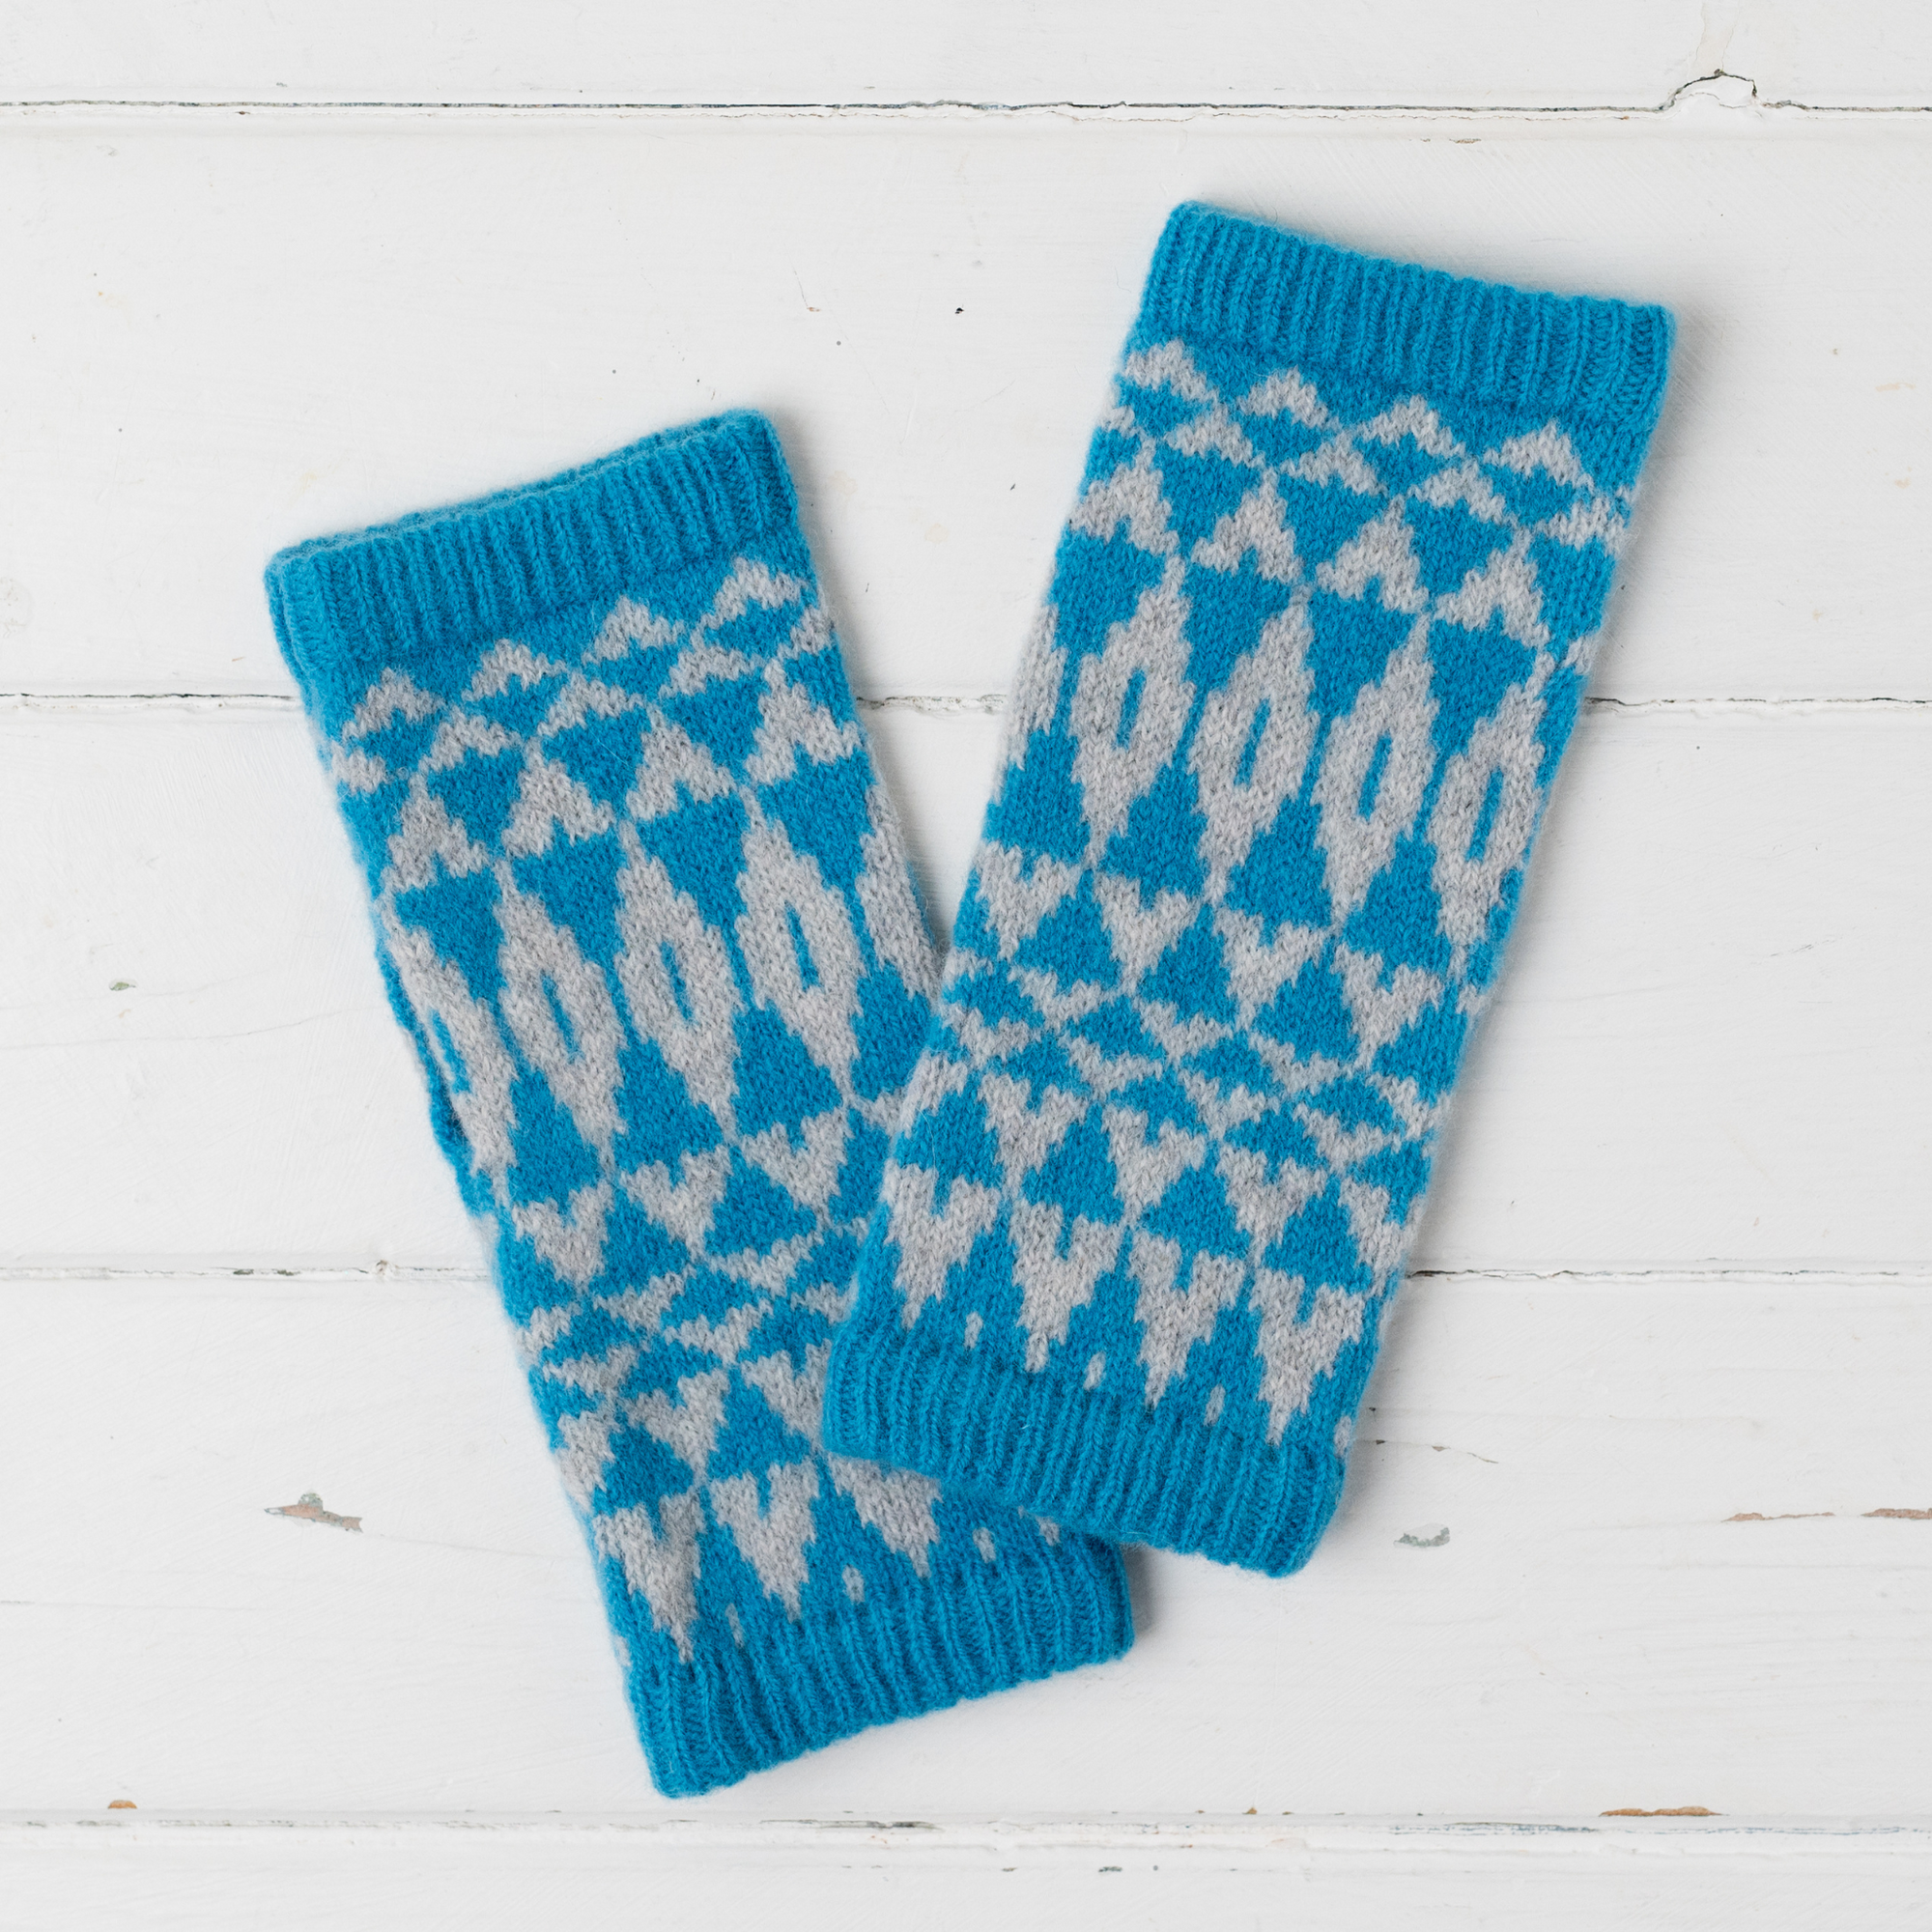 Mirror wrist warmers - turquoise and zinc (MADE TO ORDER)